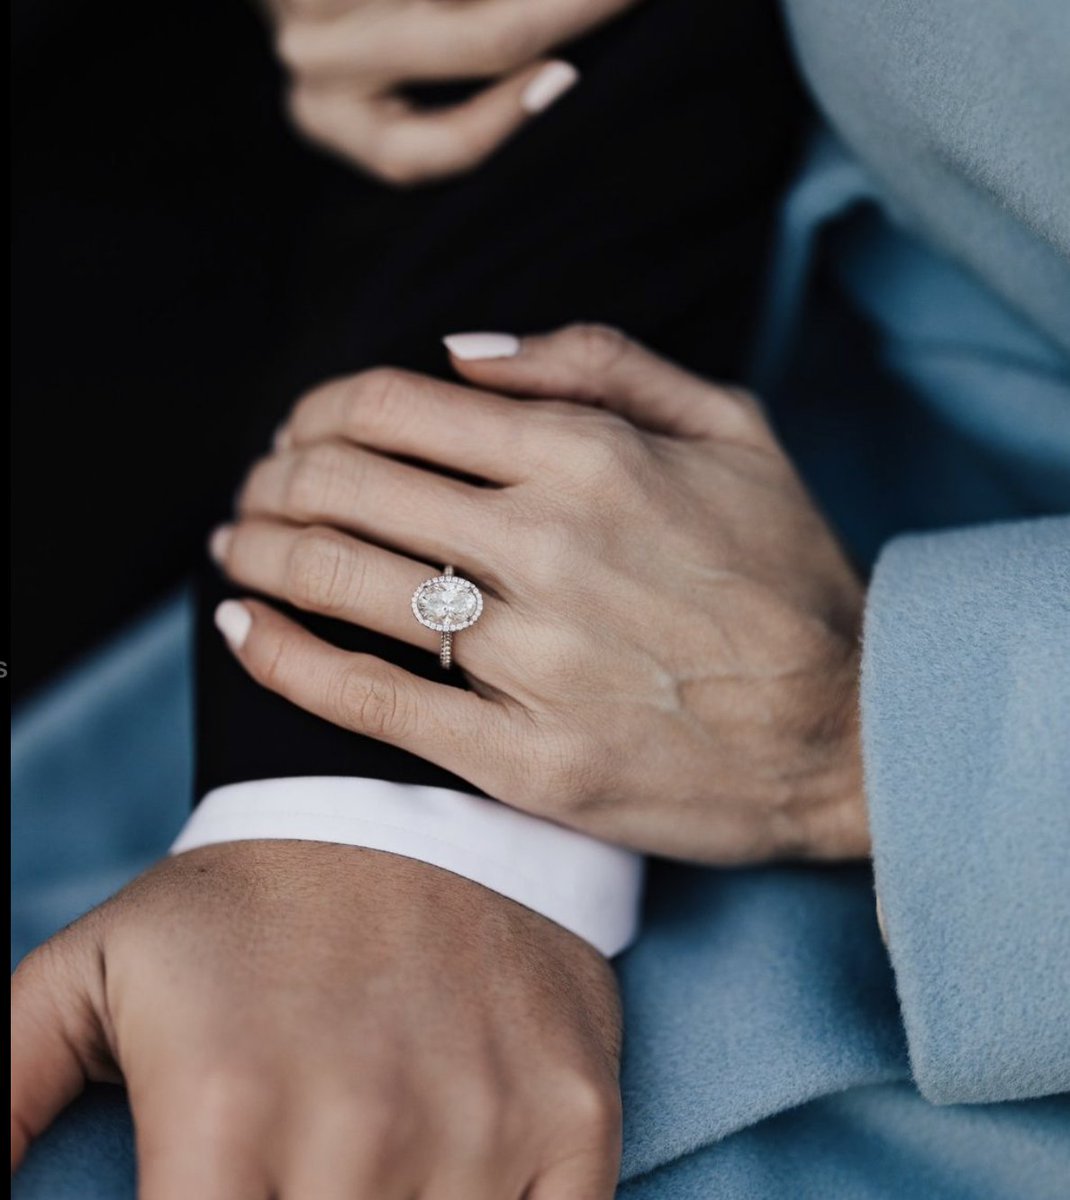 A new chapter in your love story begins with a design. @bachendorfs specializes in bringing that chapter to life by designing more than just a ring. They design for your future. 💍

#shoptheplaza #dallasshopping #luxuryshopping #dallastx #dallaslifestyle #diamonds #engagement